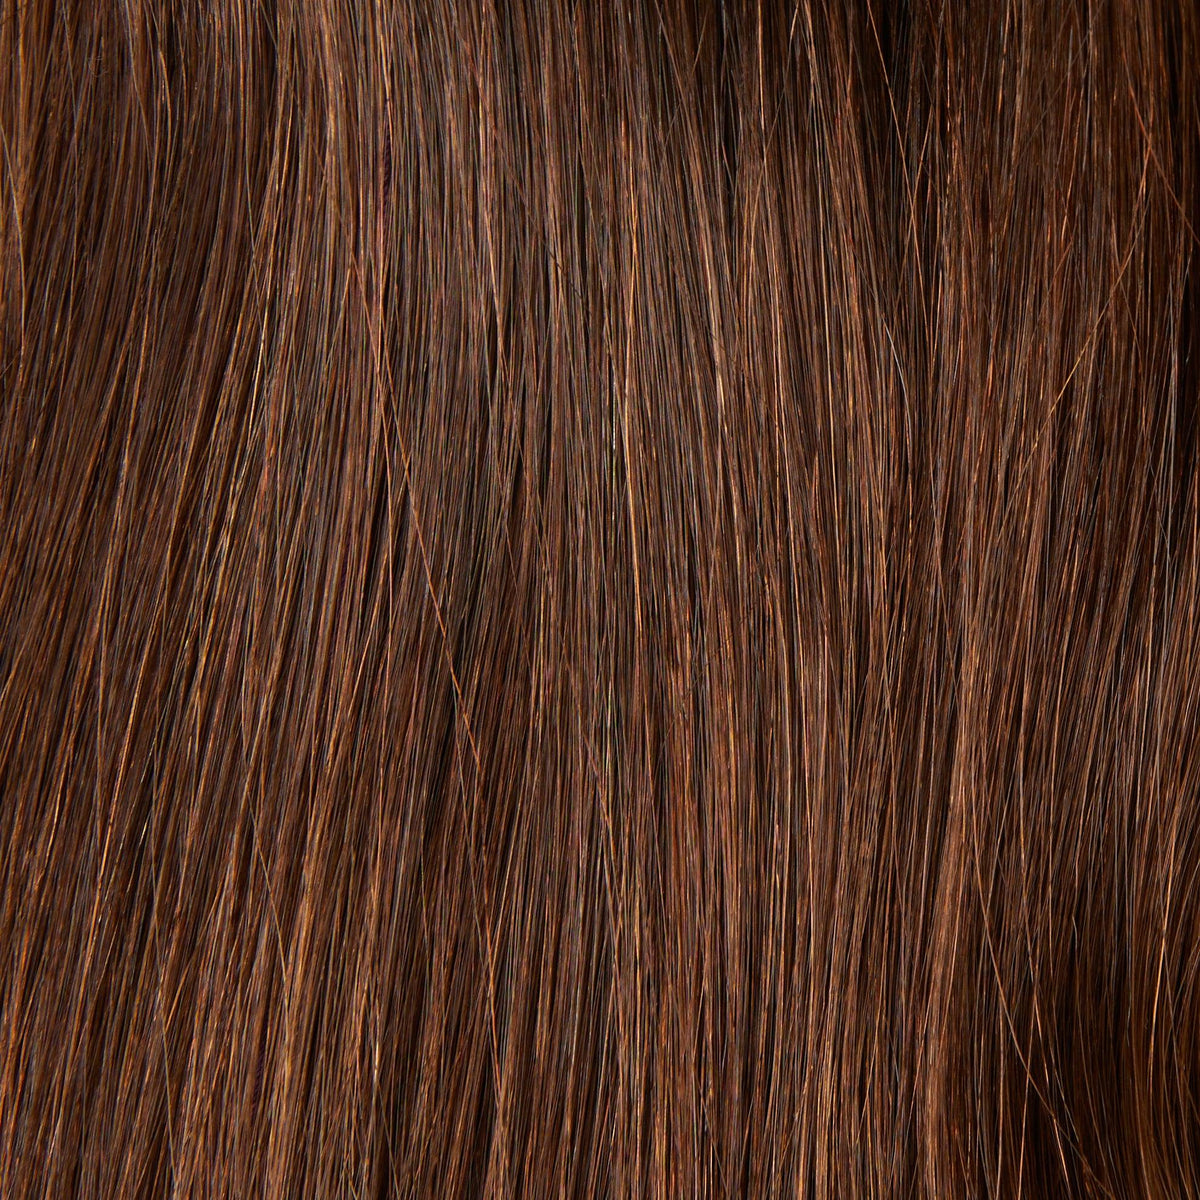 #6-8 - Medium Brown LACE TOP WIGS - Fortune Wigs